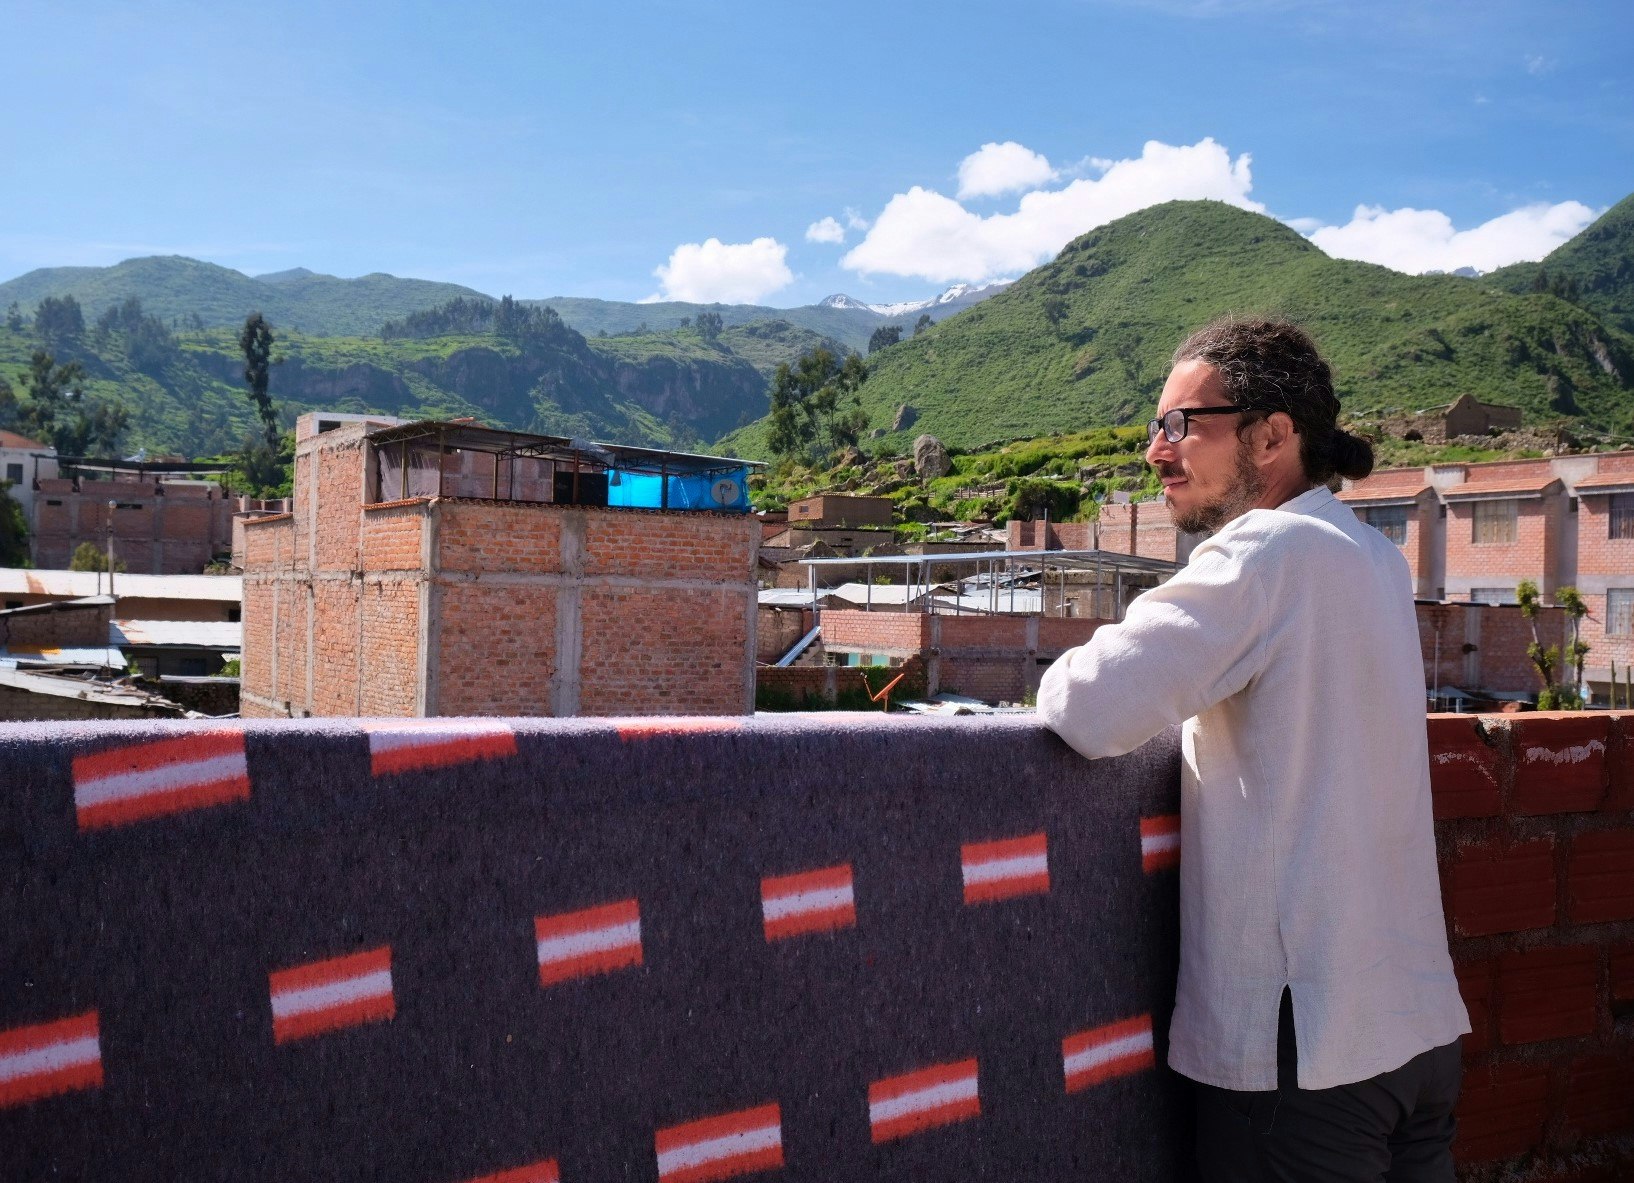 Travel writer Marco Marco Ferrarese surveys the surrounds of Cabanaconde in Peru from the rooftop of his hostel accommodation.